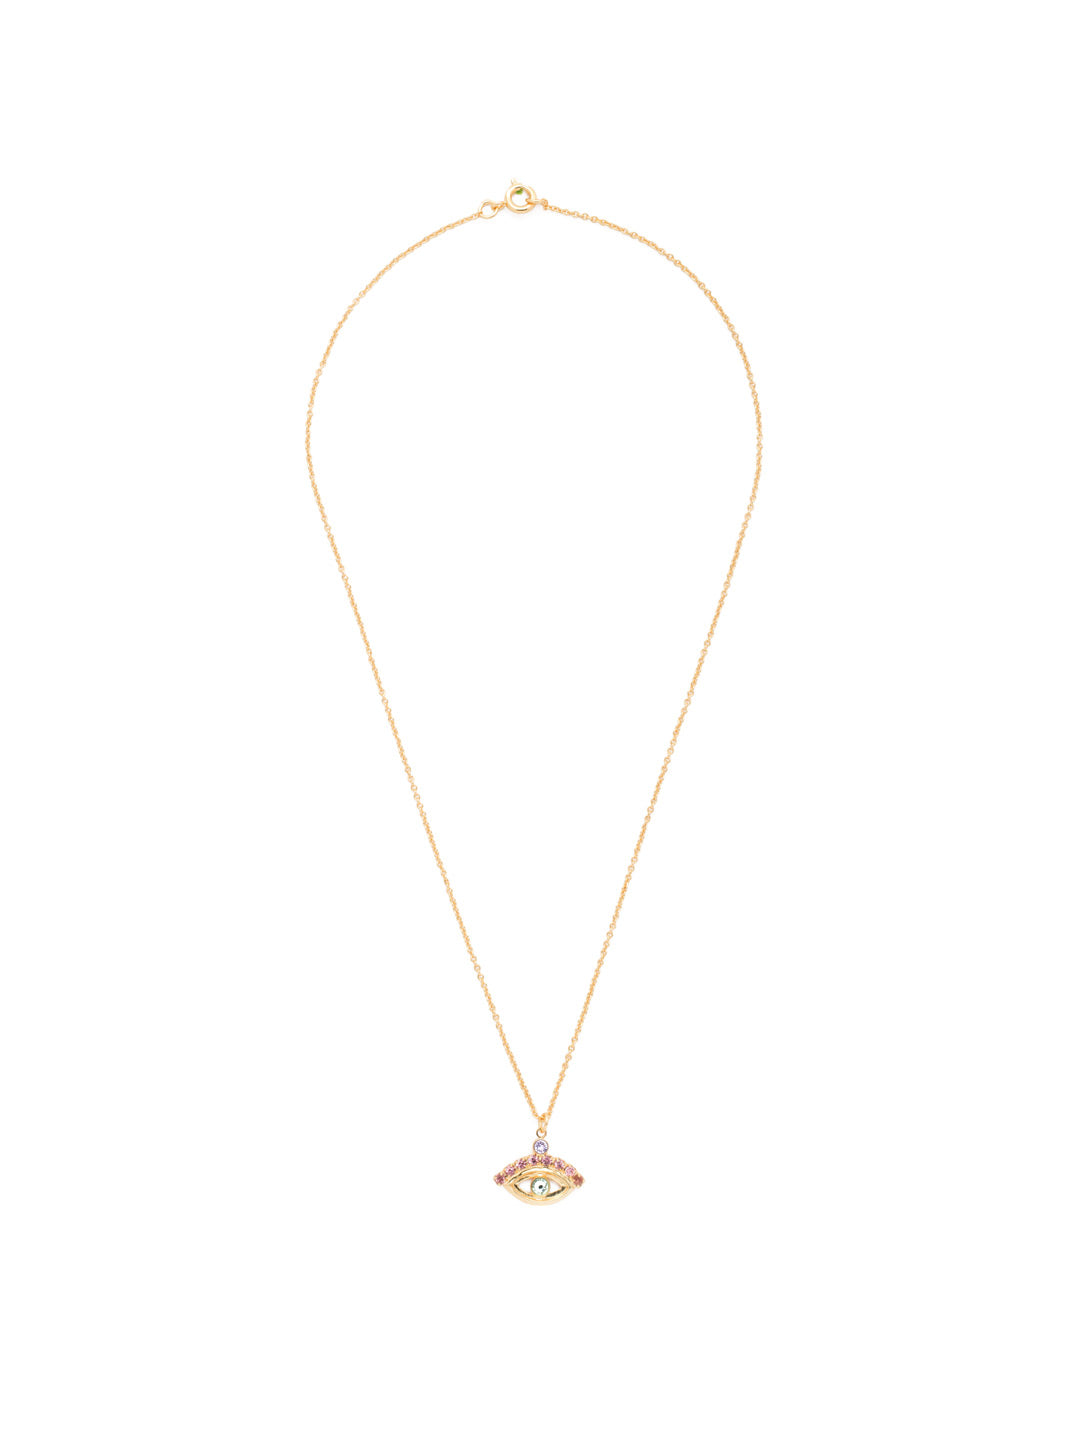 Mini Evil Eye Pendant Necklace - NEV6BGSPR - <p>A must for Evil Eye fans, our Mini Evil Eye Pendant Necklace makes a simple, yet sparkly, statement with crystals. From Sorrelli's Spring Rain collection in our Bright Gold-tone finish.</p>